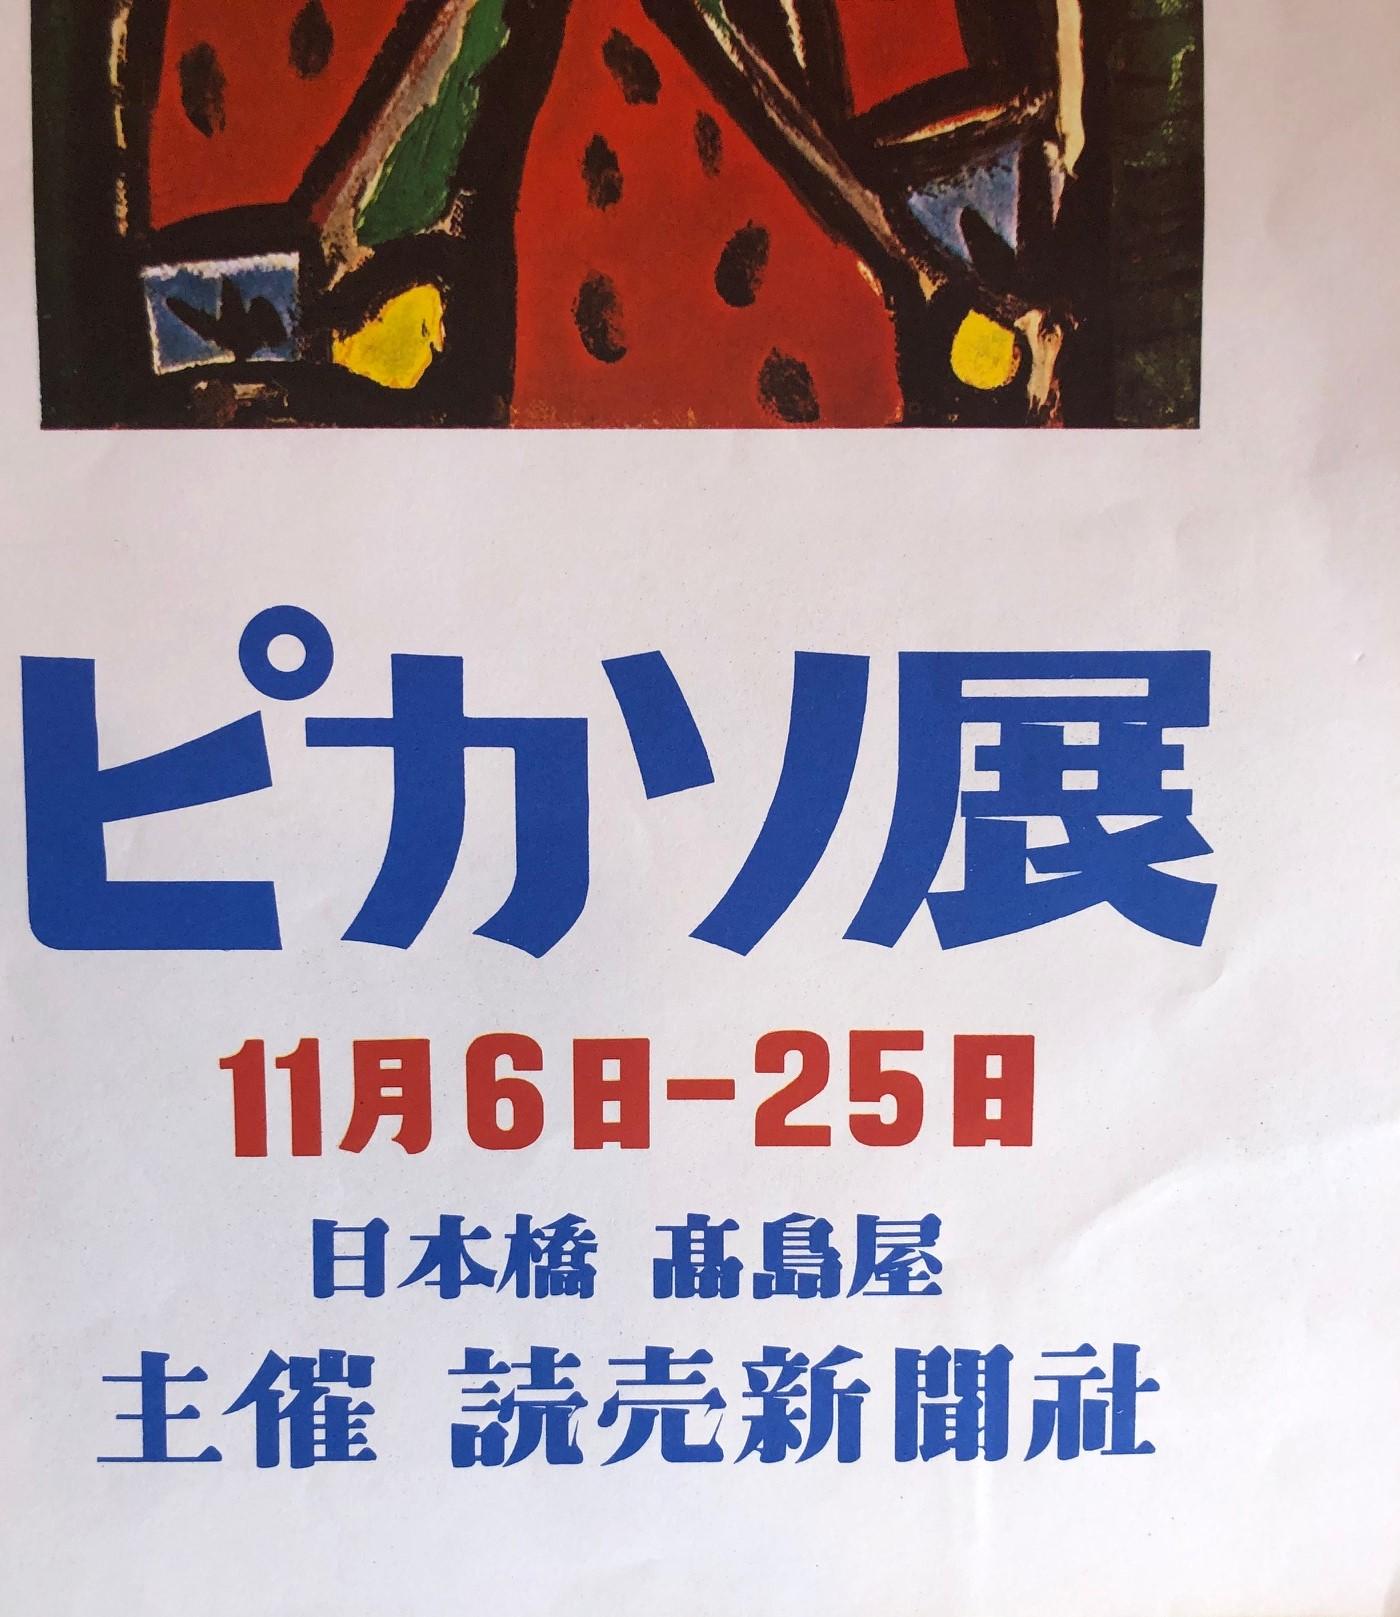 French Midcentury Japanese Kanji Lettering Poster of Pablo Picasso's Exhibition